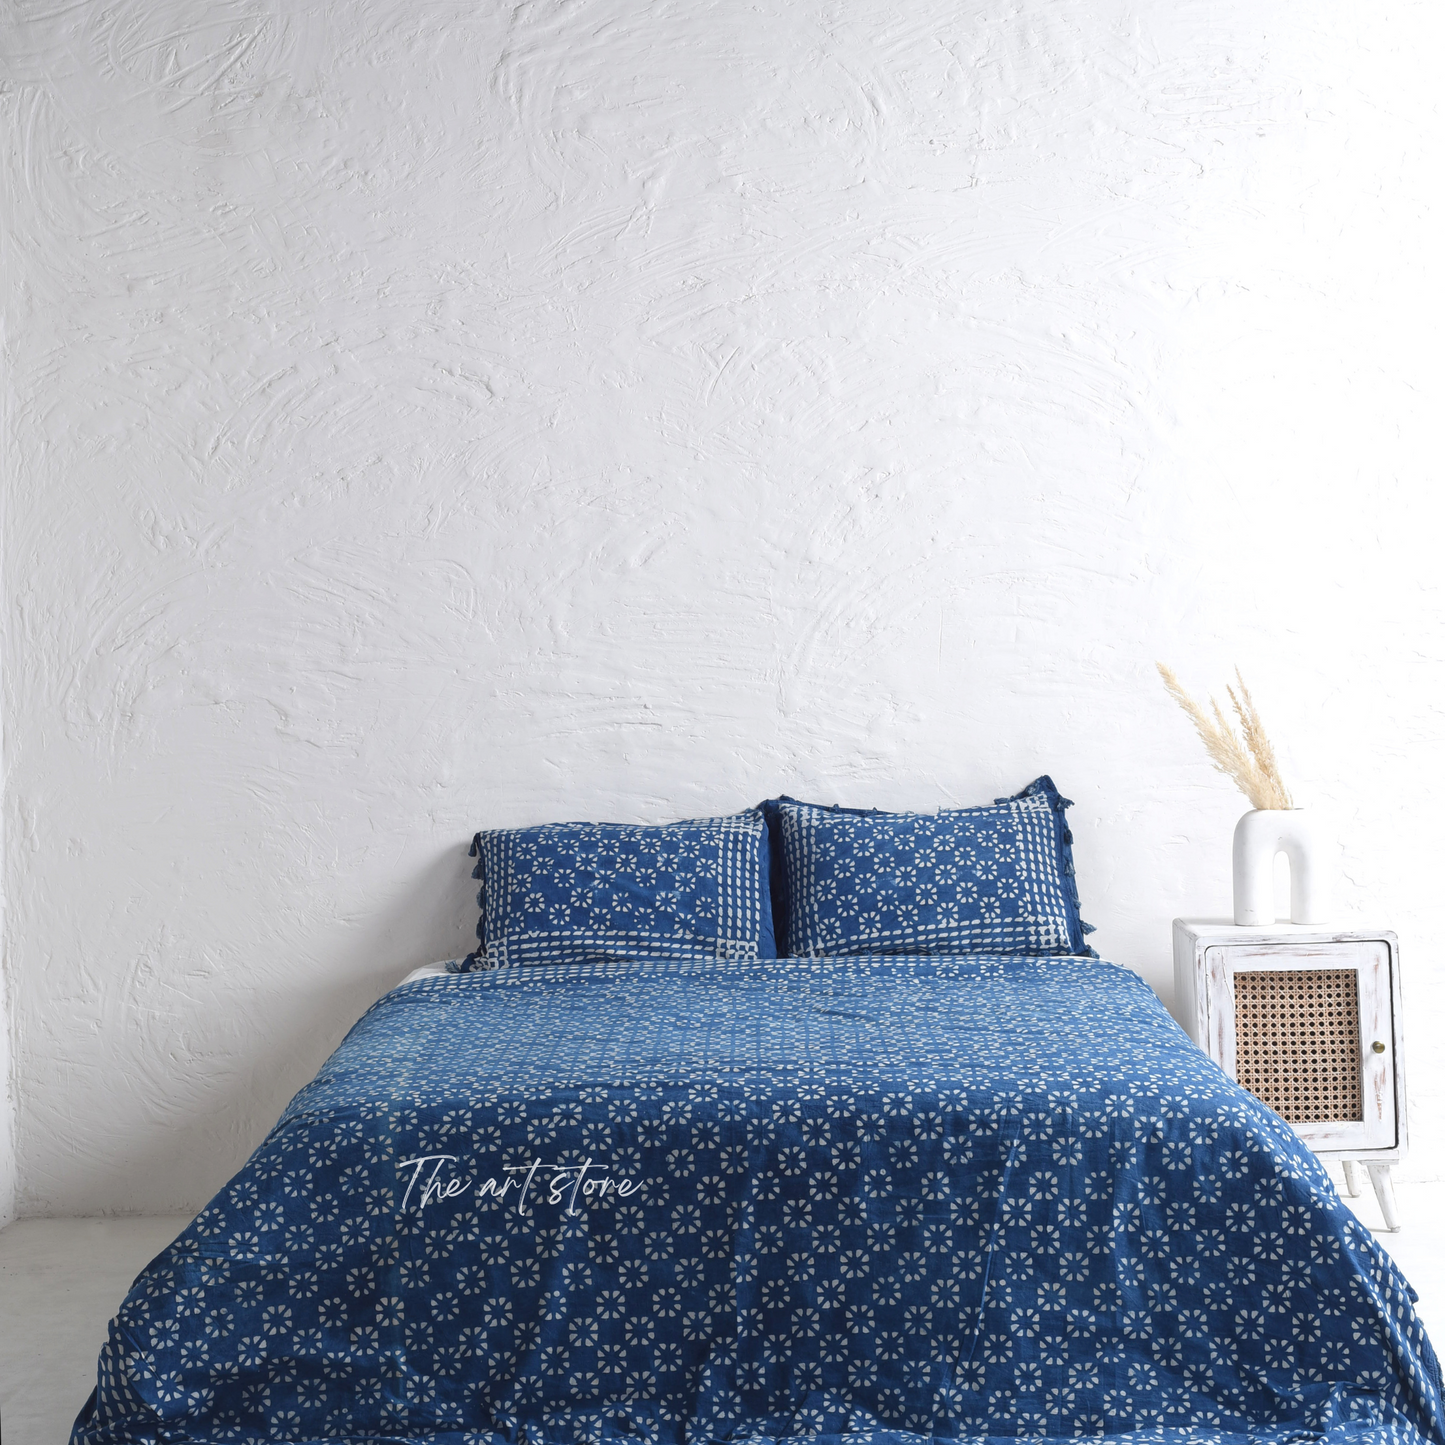 Boho Aesthetic Stone Washed Block Printed Duvet Cover and Pillow Set